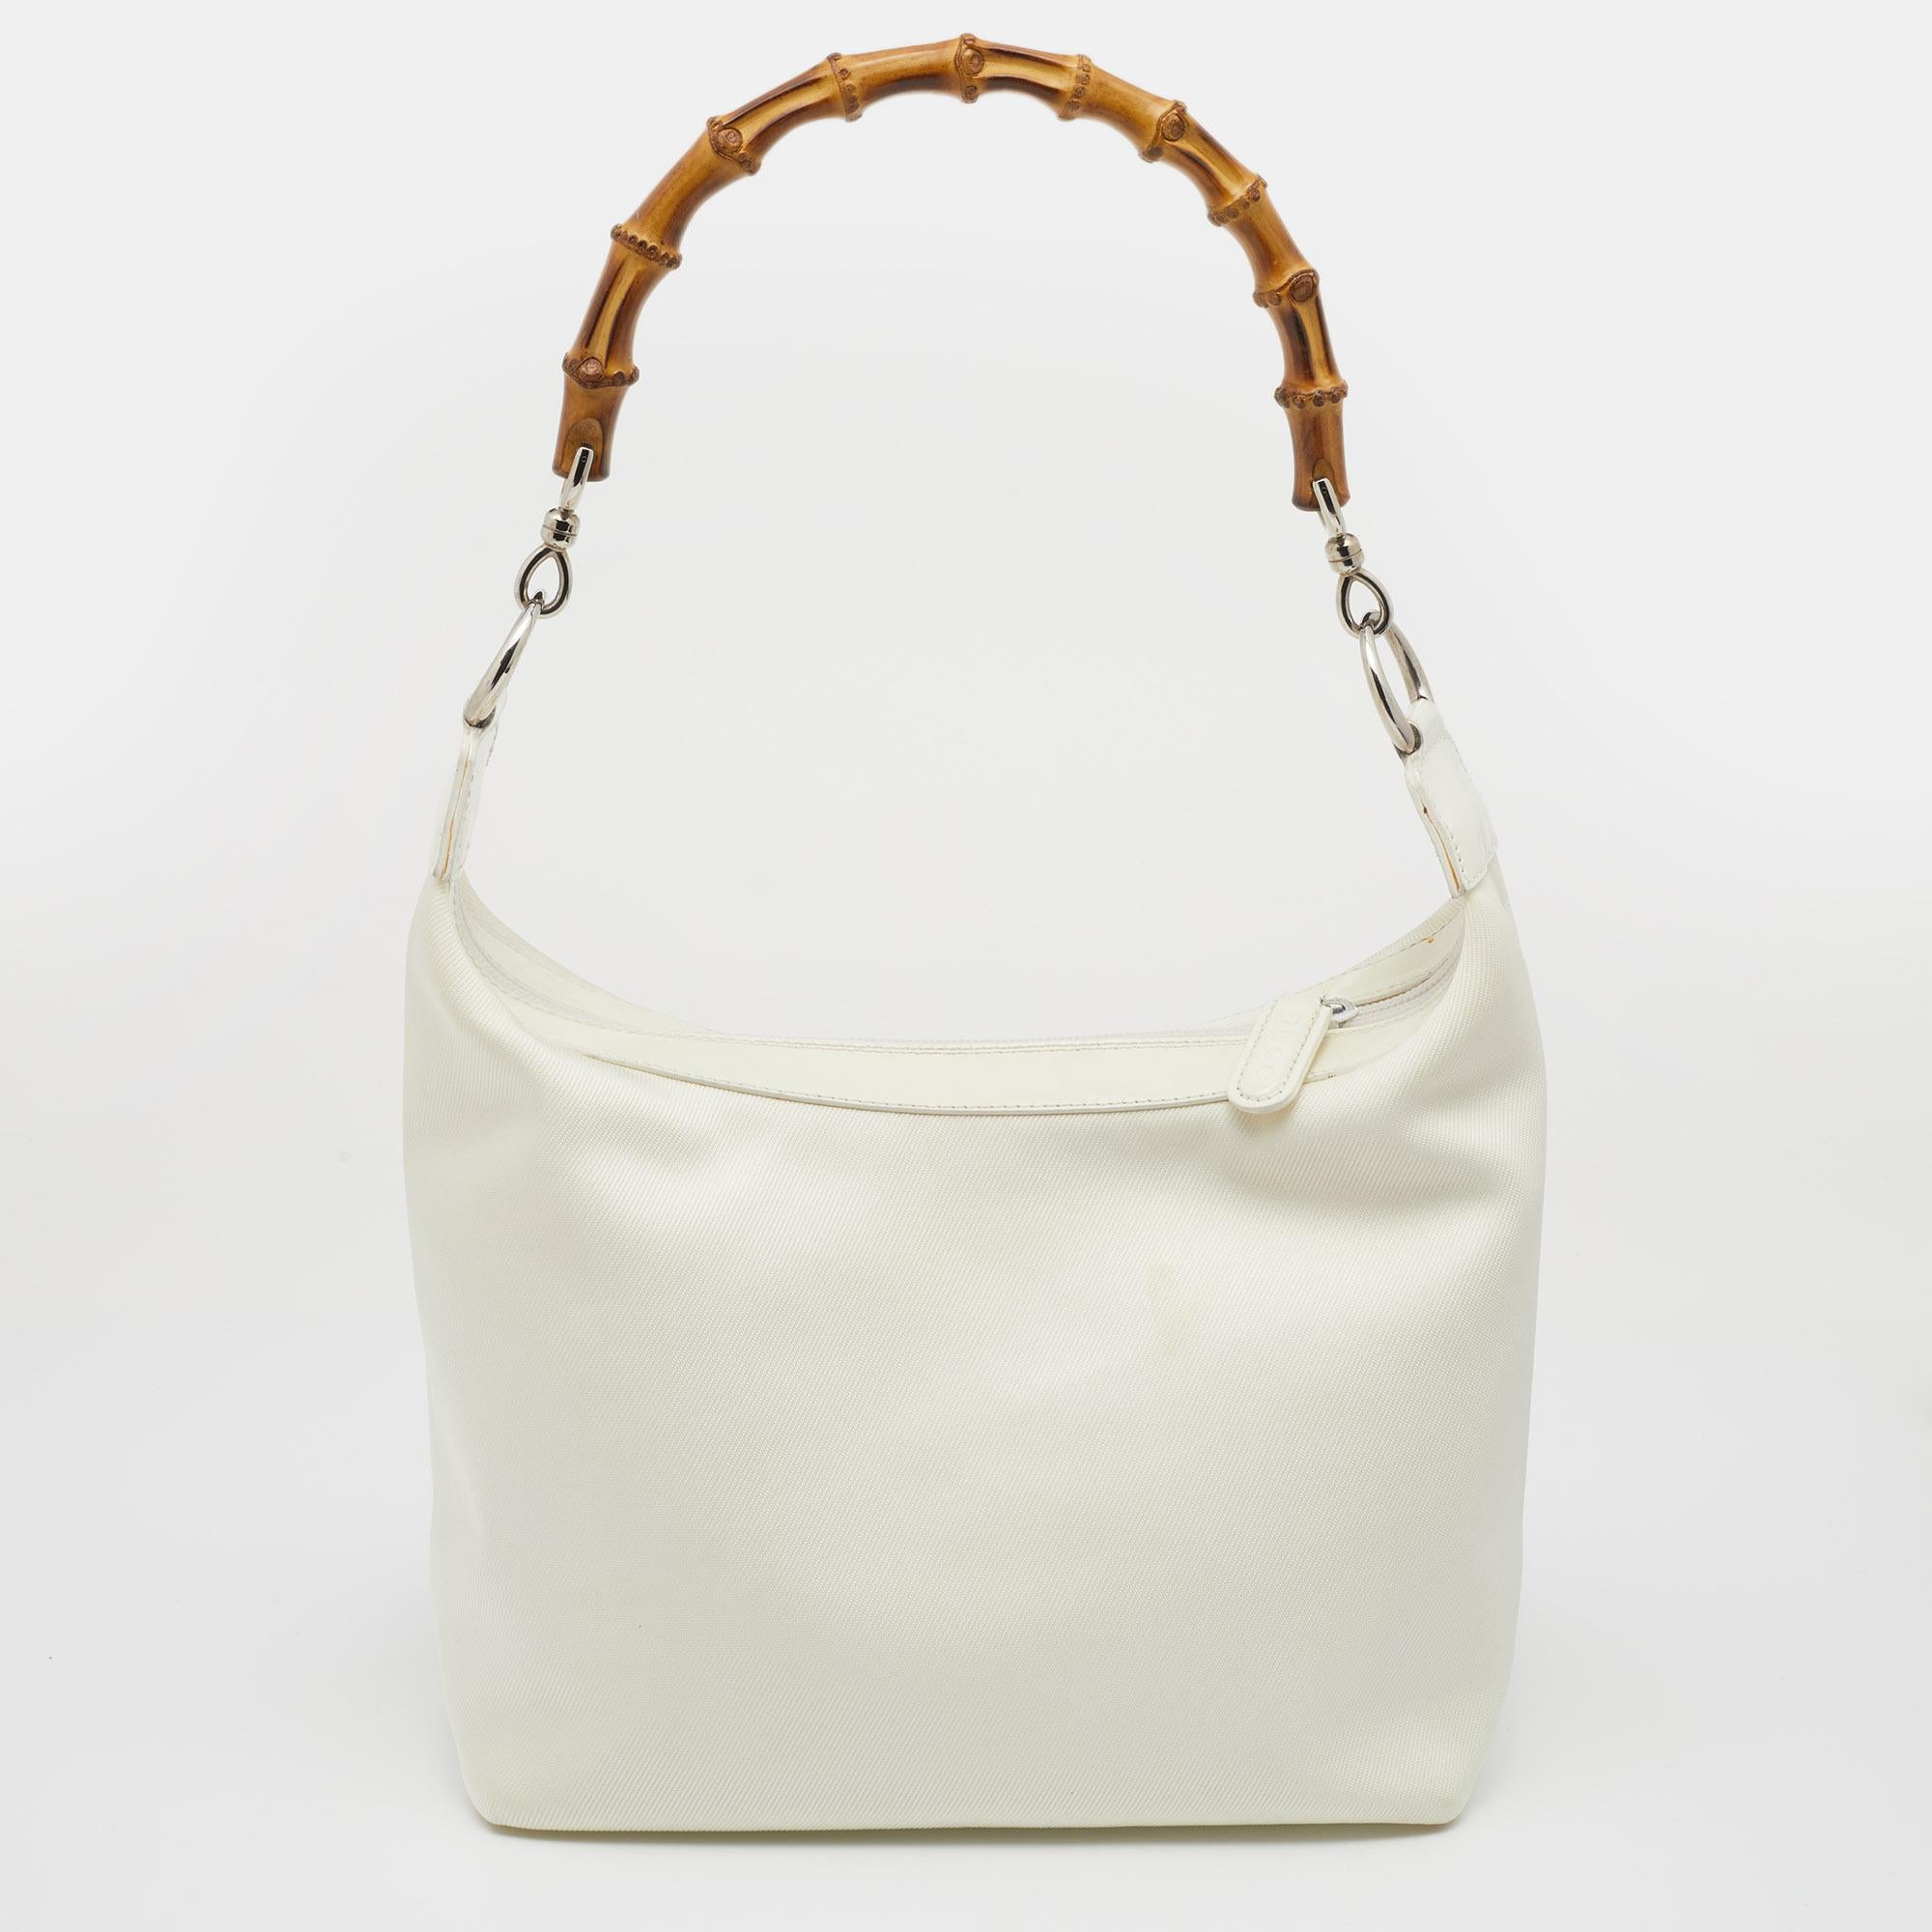 Hobos are ideal companions for ample occasions! Here we have a fashion-meets-function piece crafted from canvas and leather. This Gucci white hobo has been equipped with a capacious interior that can easily fit in all your essentials and flaunts the